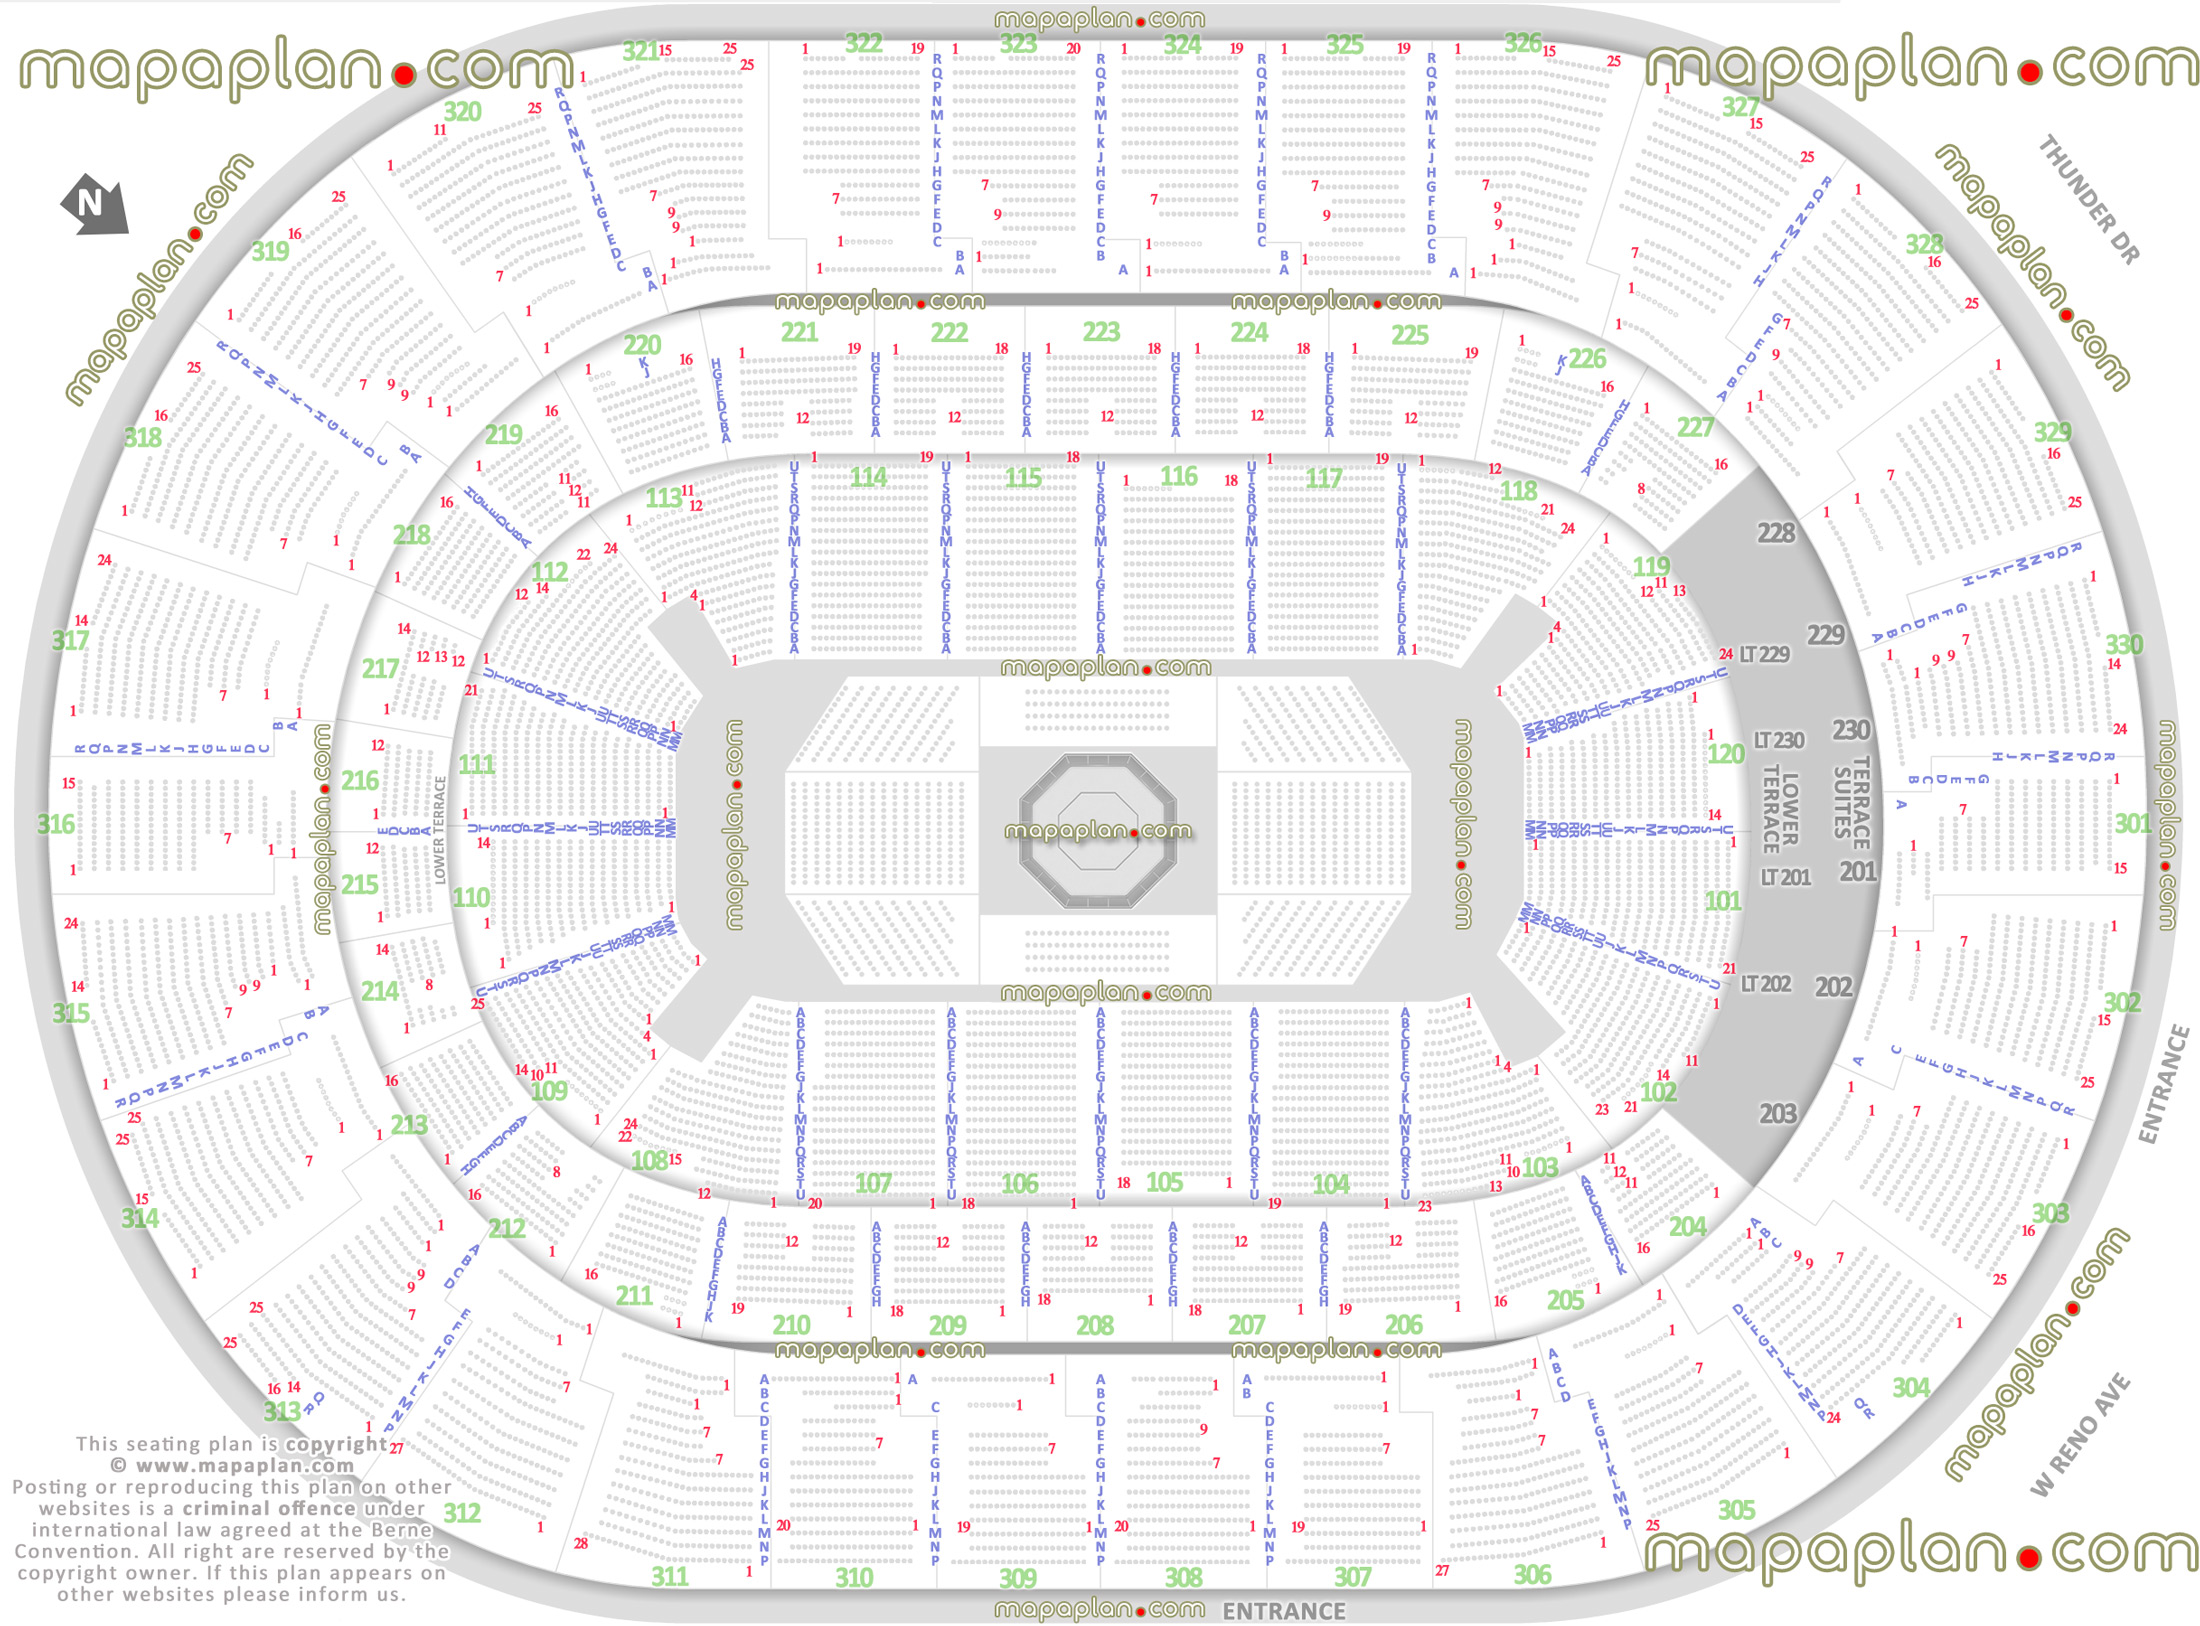 ufc seating chart row max seat capacity numbers rows each section detailed plan mma fights oklahoma lower club suites loud city upper level sections 301 302 303 304 305 306 307 308 309 310 311 312 313 314 315 316 317 318 319 320 321 322 323 324 325 326 327 328 329 330 Oklahoma City Paycom Center Arena seating chart